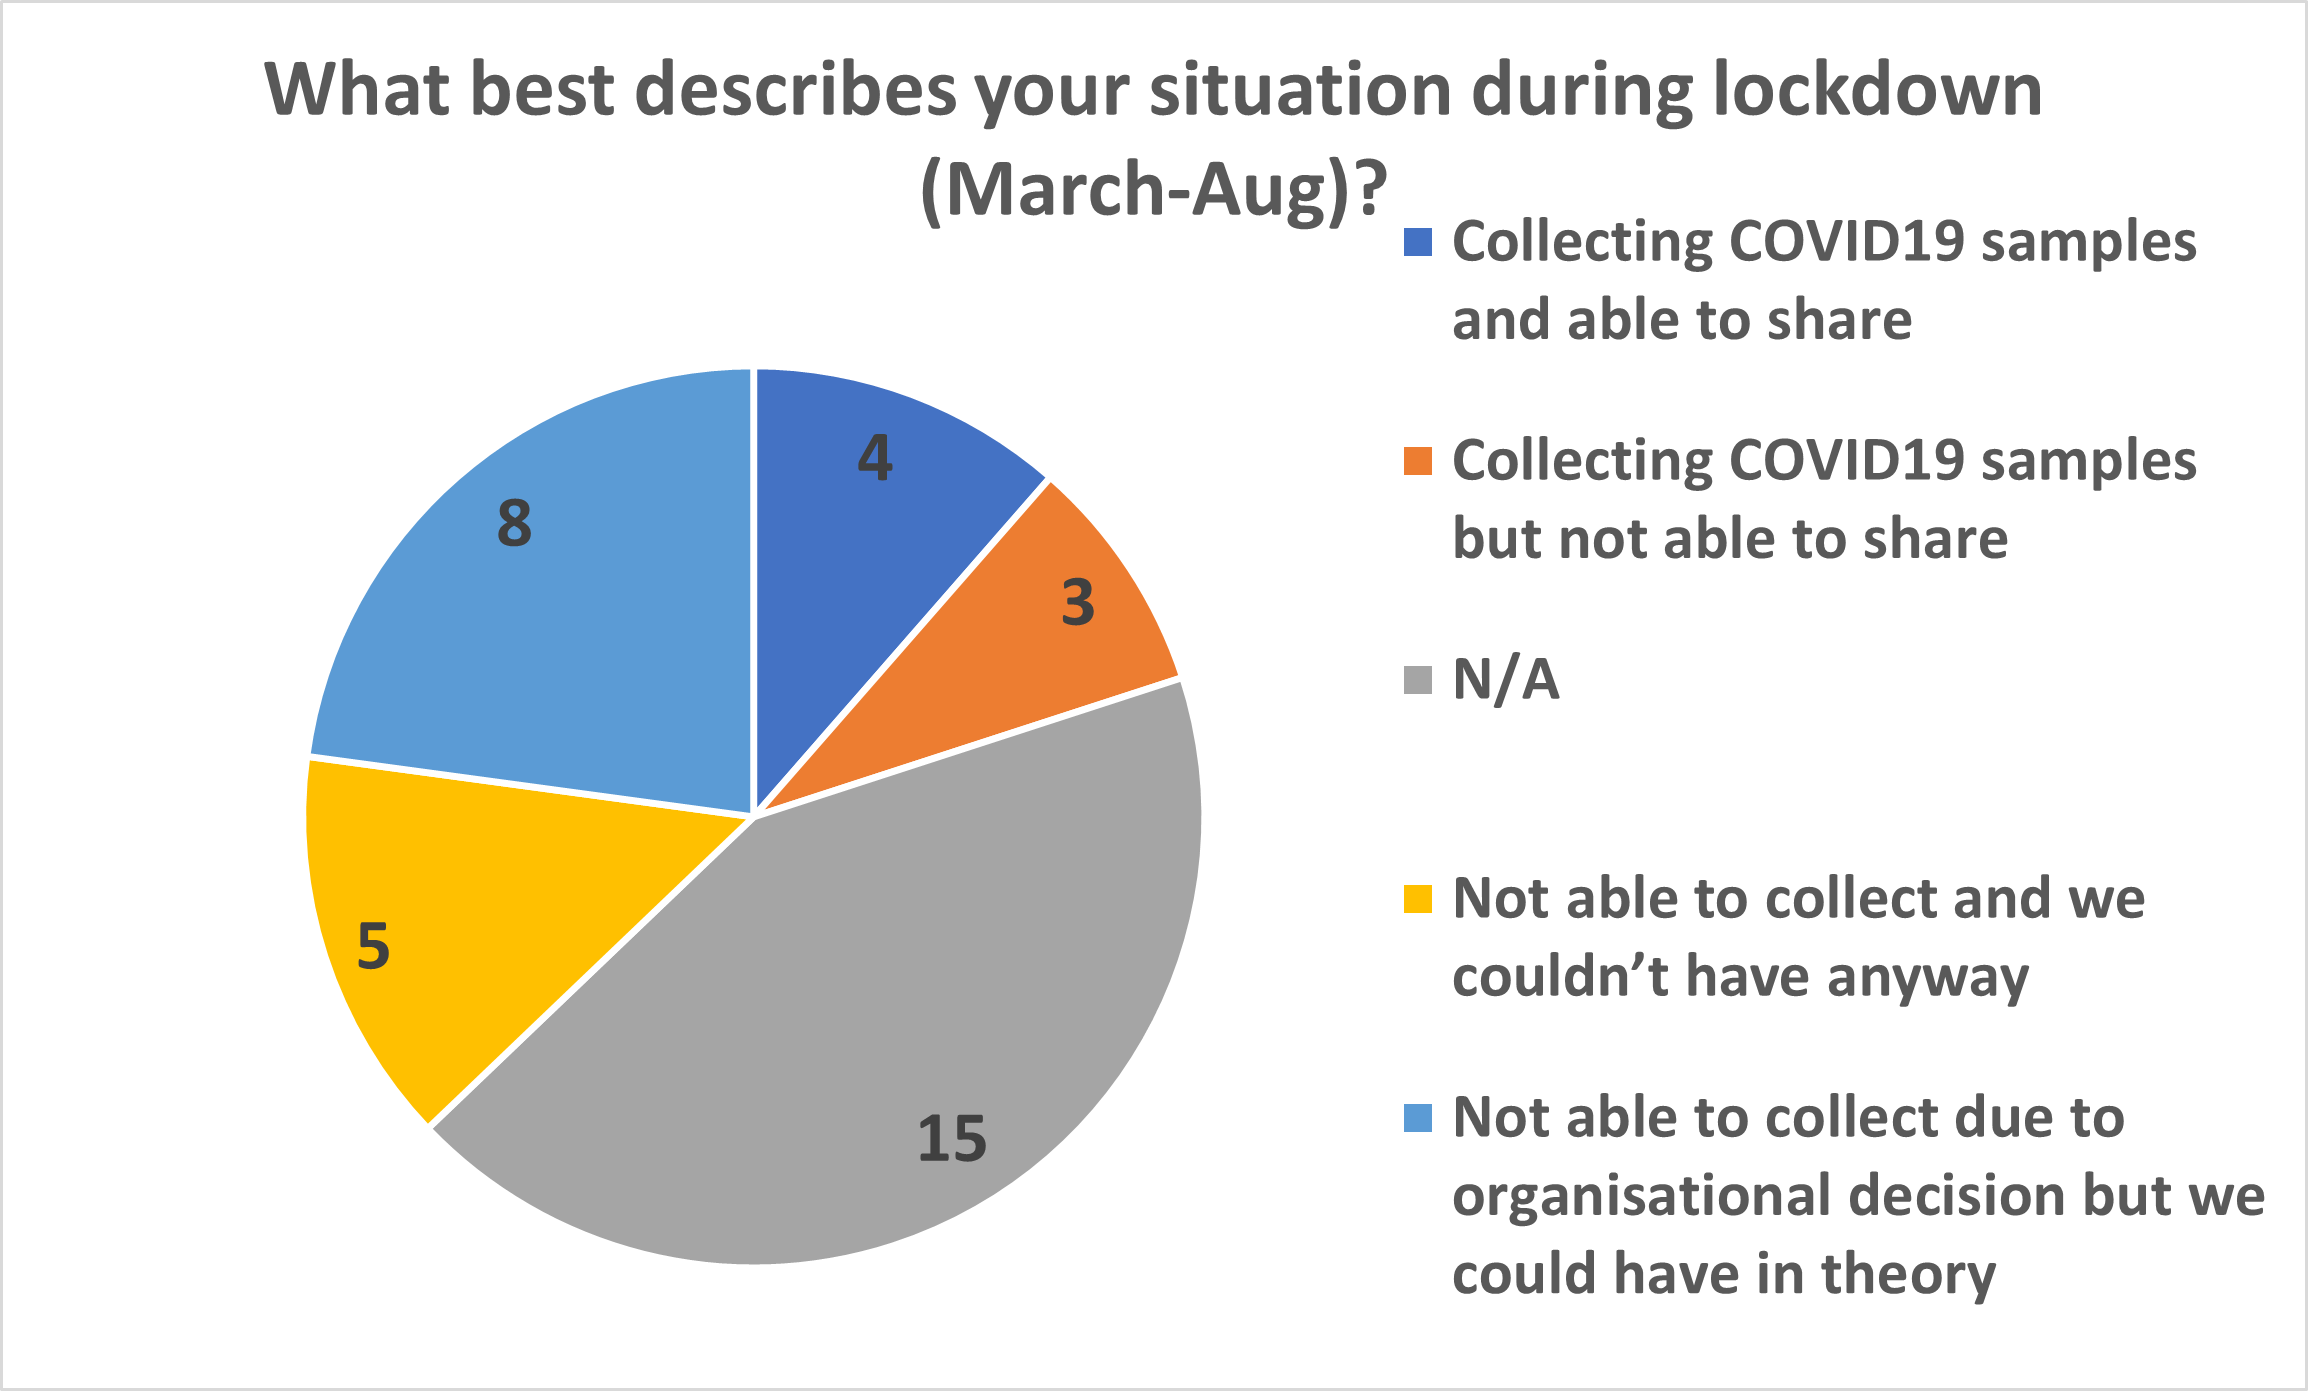 Pie chart from the Biobanking Showcase highlighting biobanks ability to collect samples during lockdown